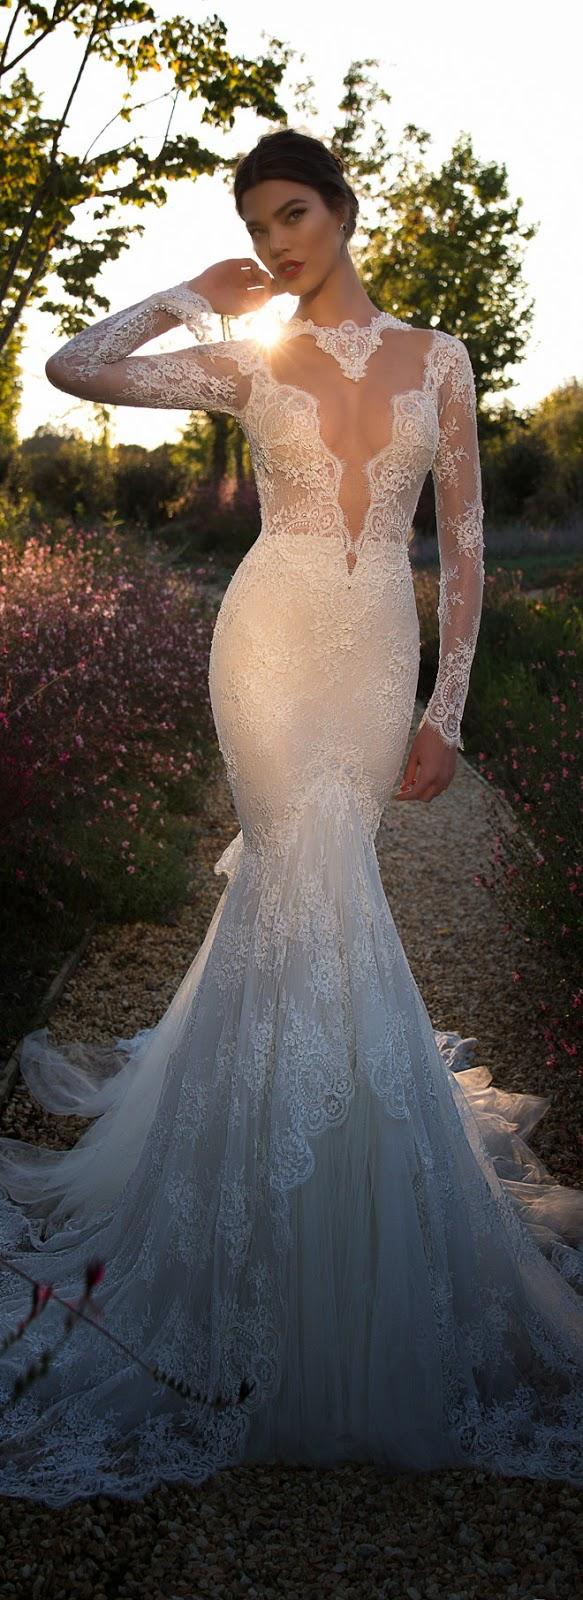 Berta 2015 Bridal Collection - Belle the Magazine . The Wedding Blog For The Sophisticated Bride